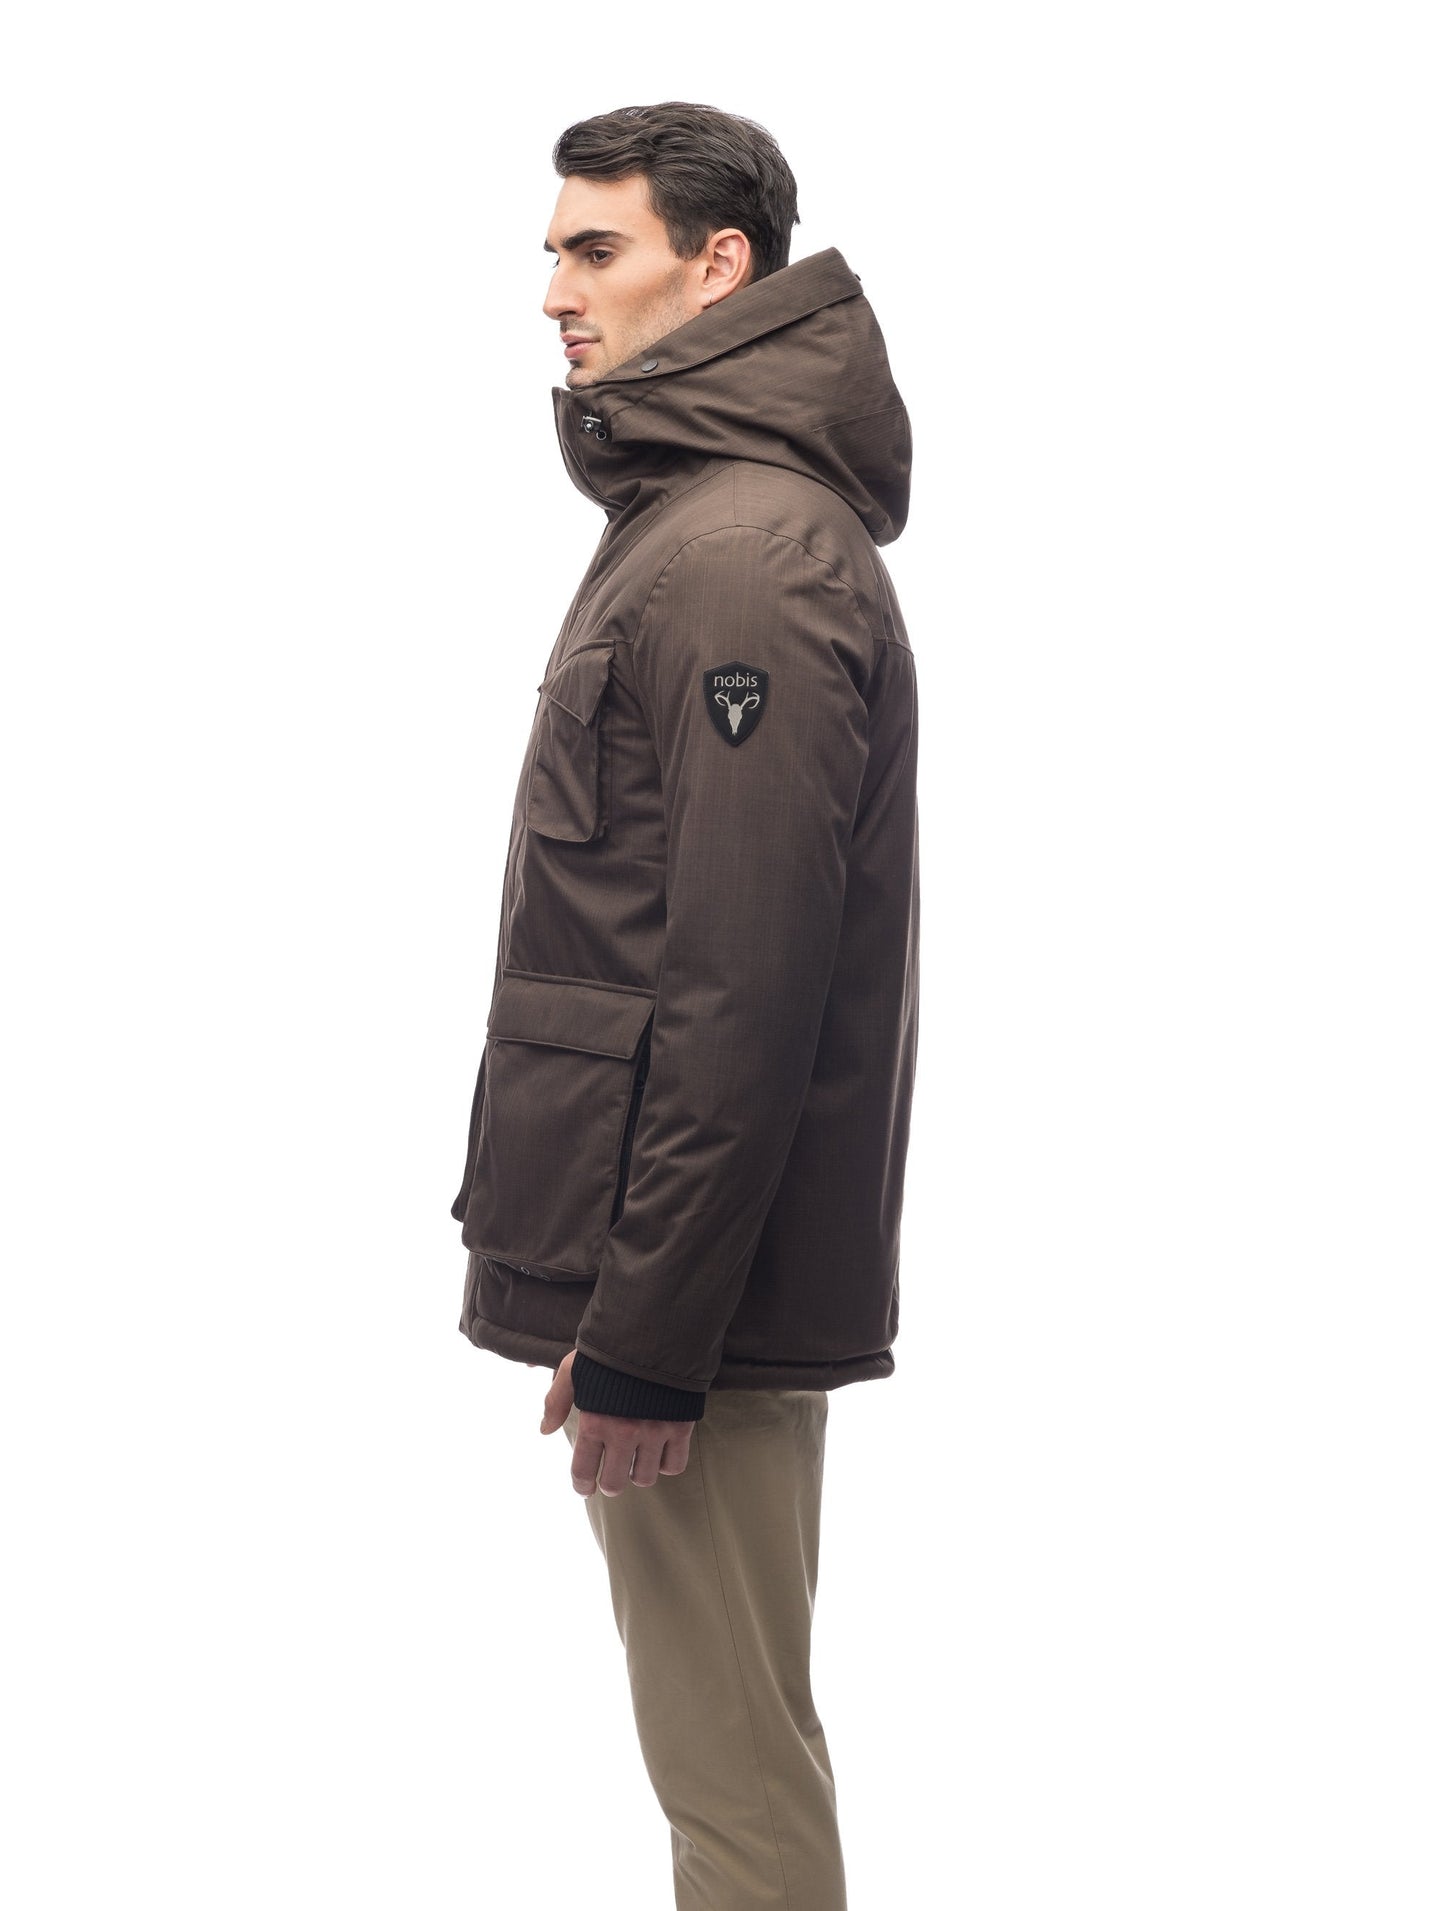 Waist length men's down filled parka with four patch pockets in CH Brown